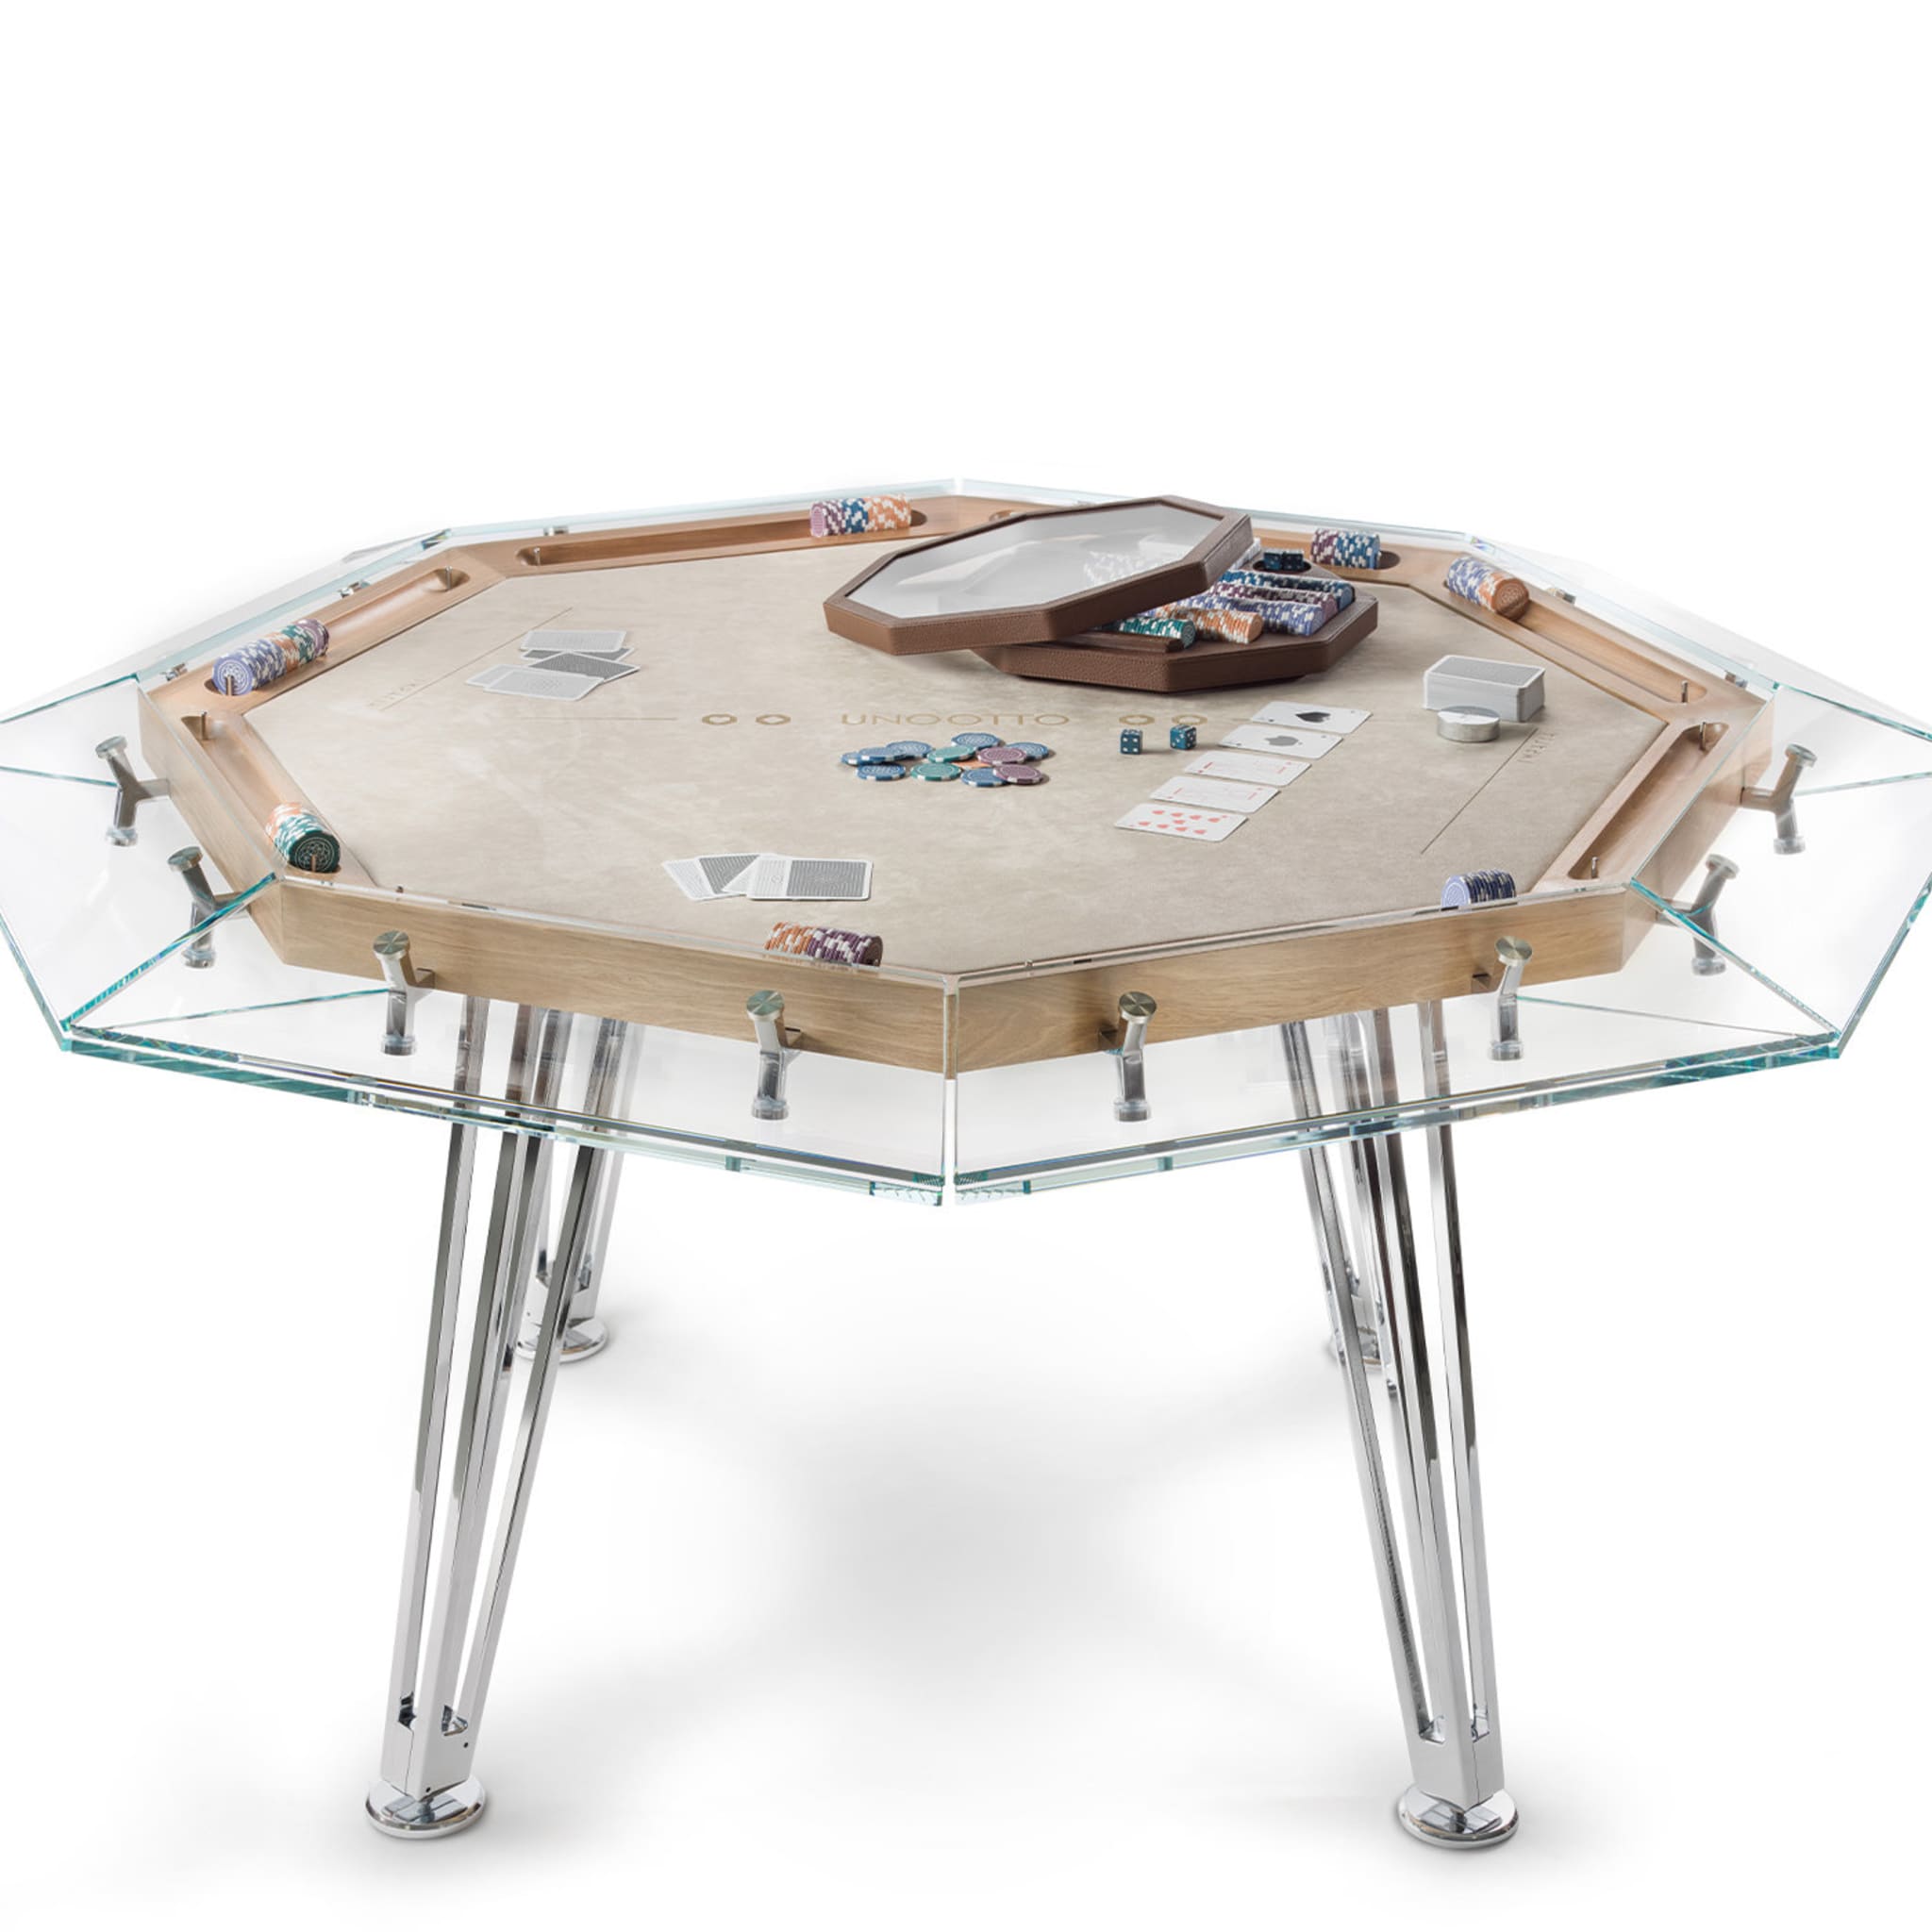 Unootto 8 Player Wood Edition Poker Table - Alternative view 2